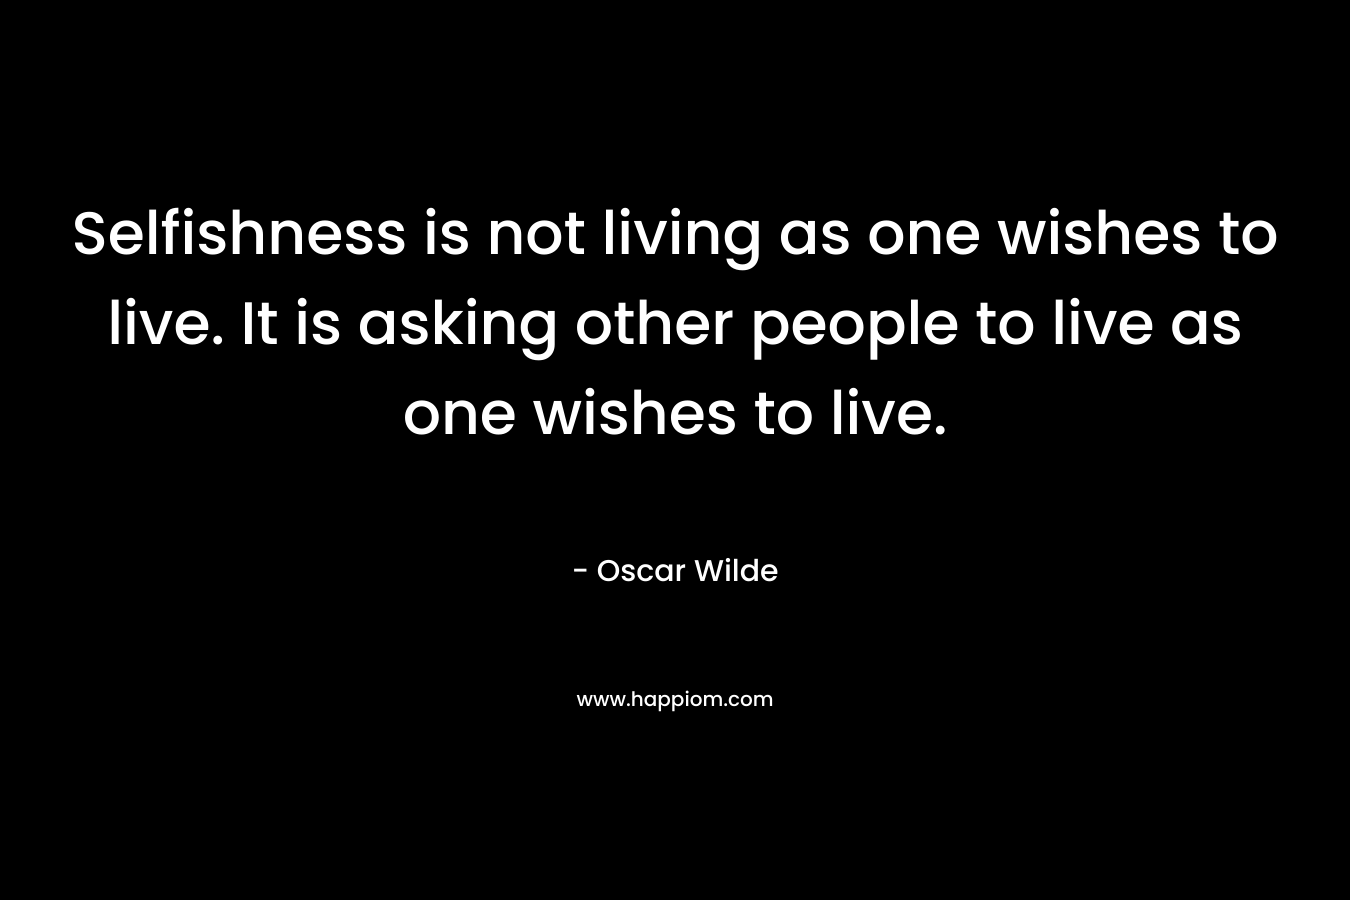 Selfishness is not living as one wishes to live. It is asking other people to live as one wishes to live.